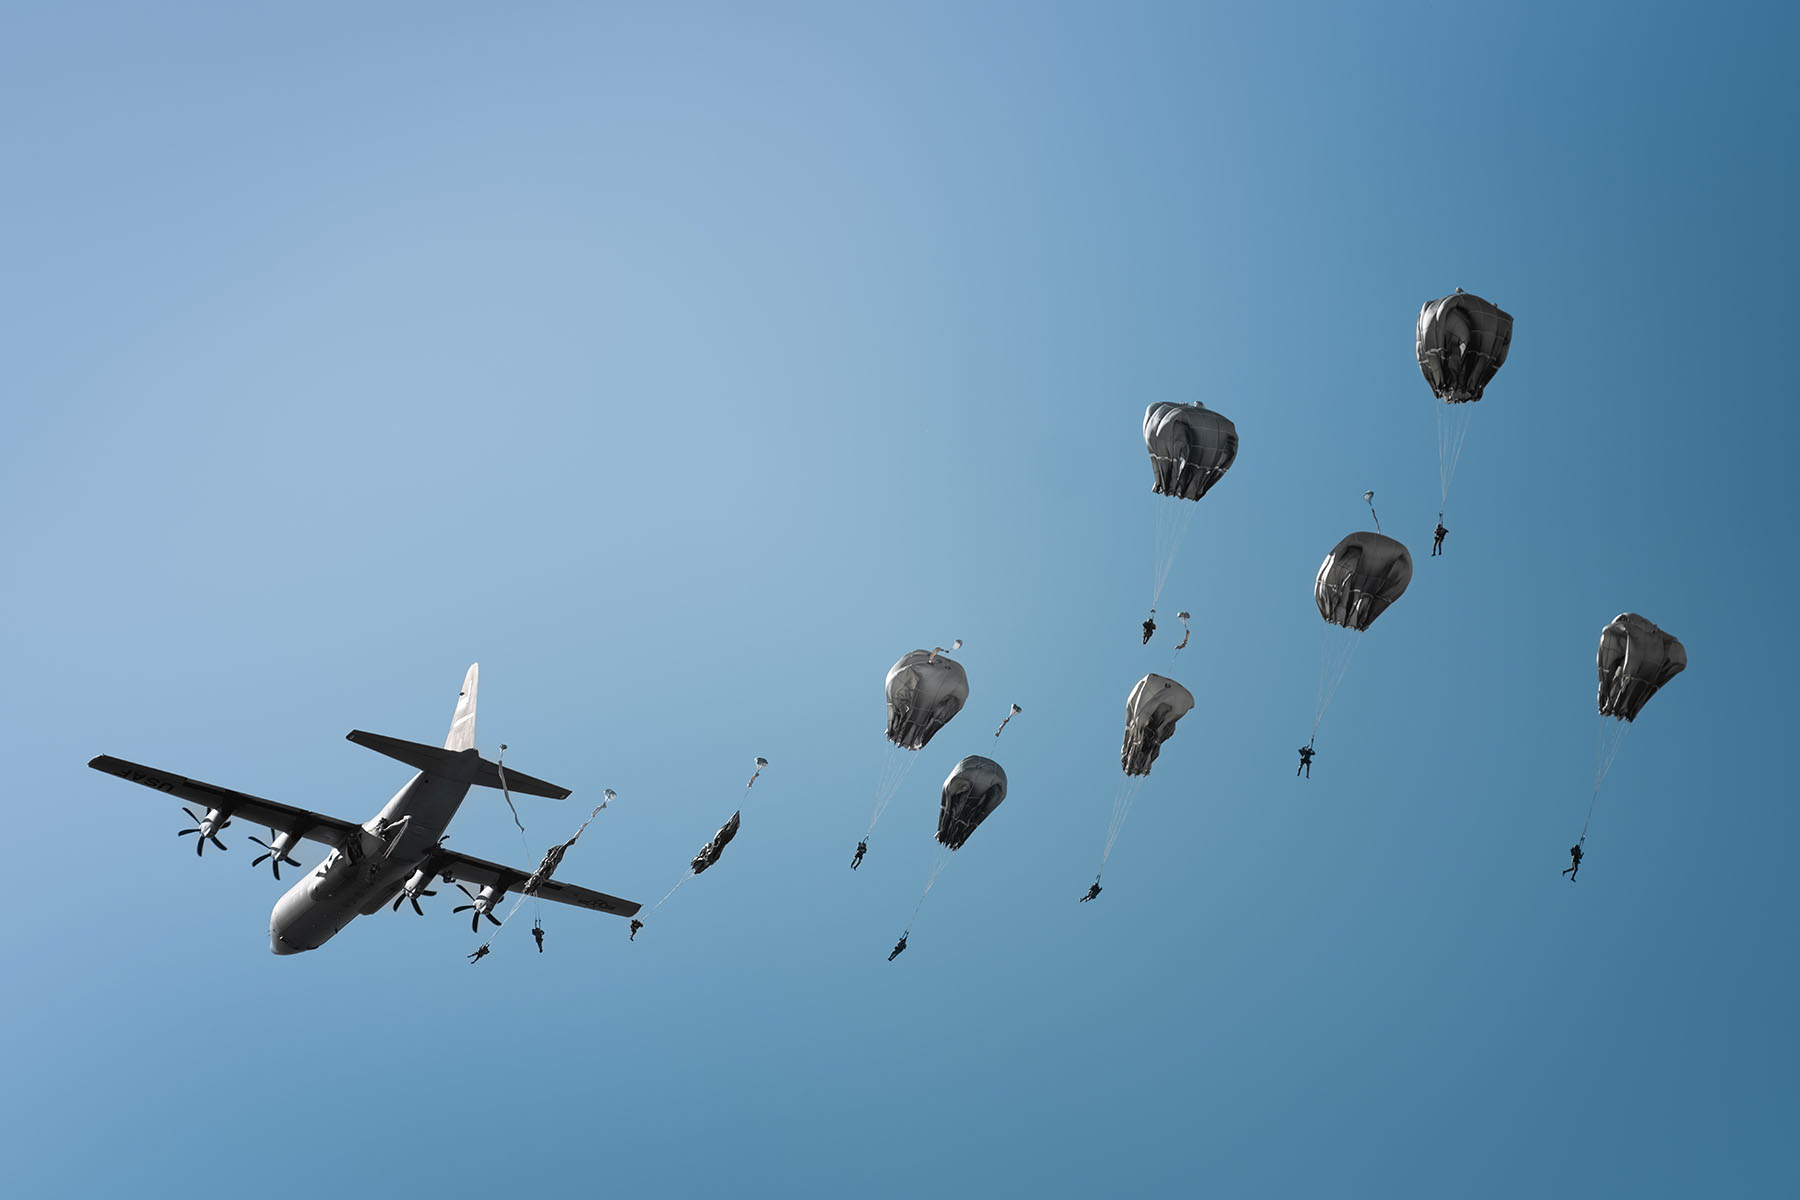 Paratroopers deploy their parachutes near an aircraft flying in blue sky.